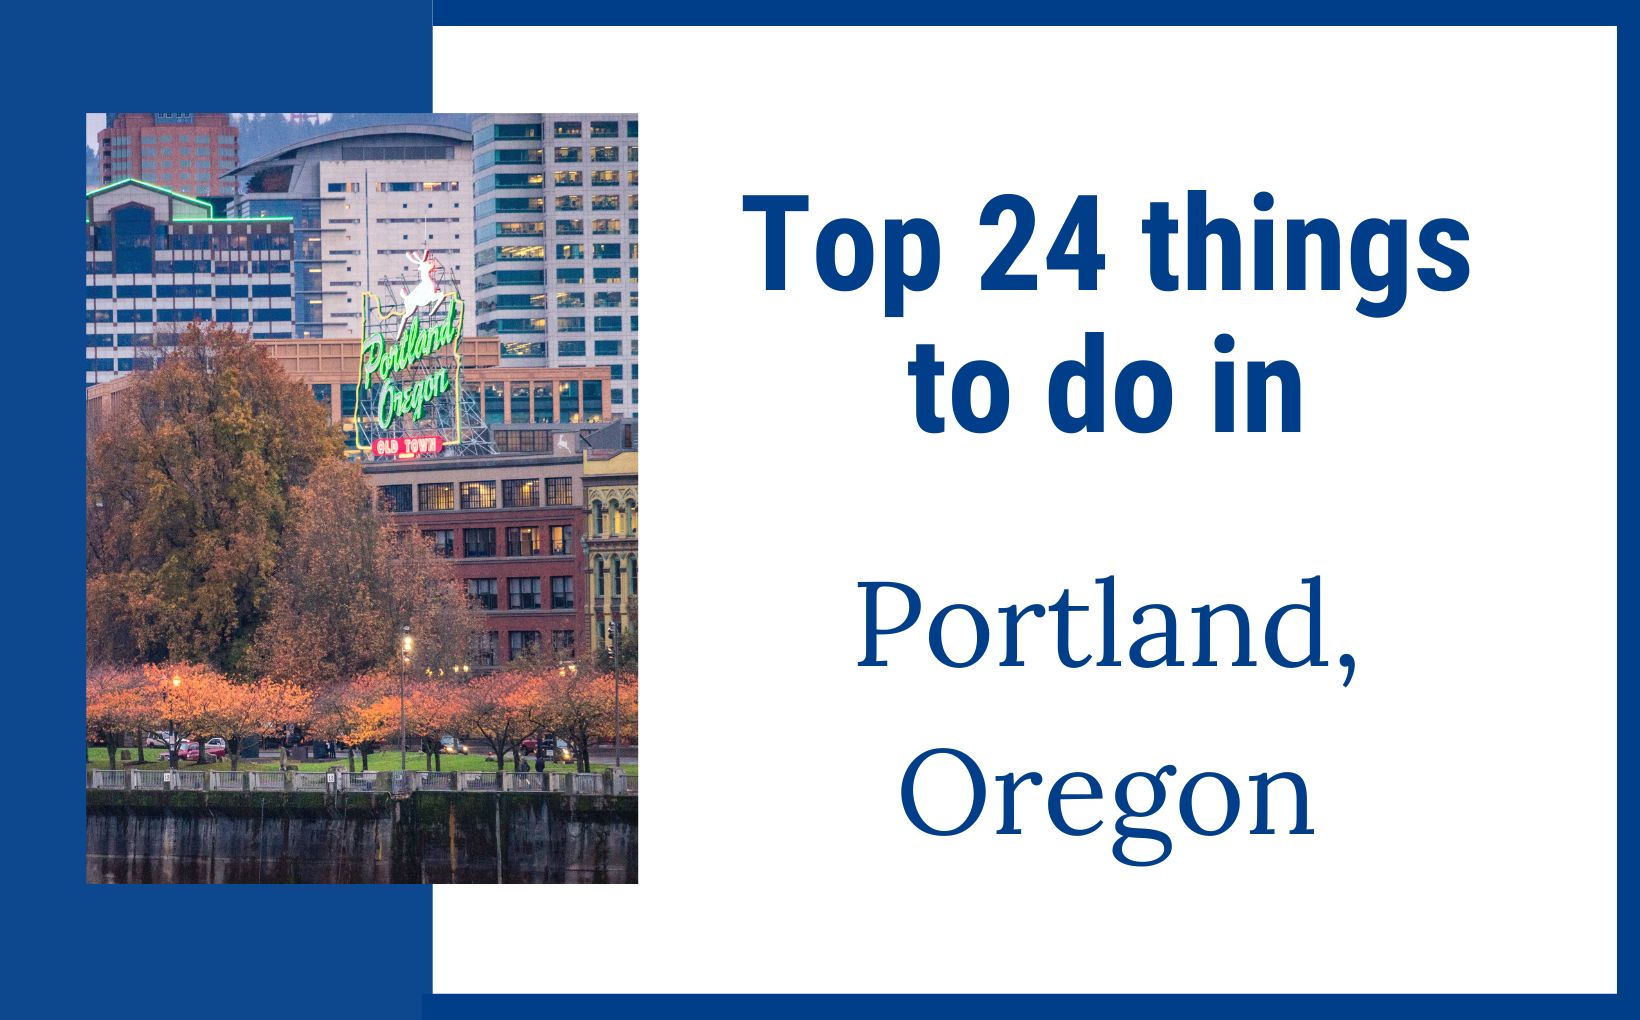 Top 24 things to do in Portland Oregon feature image